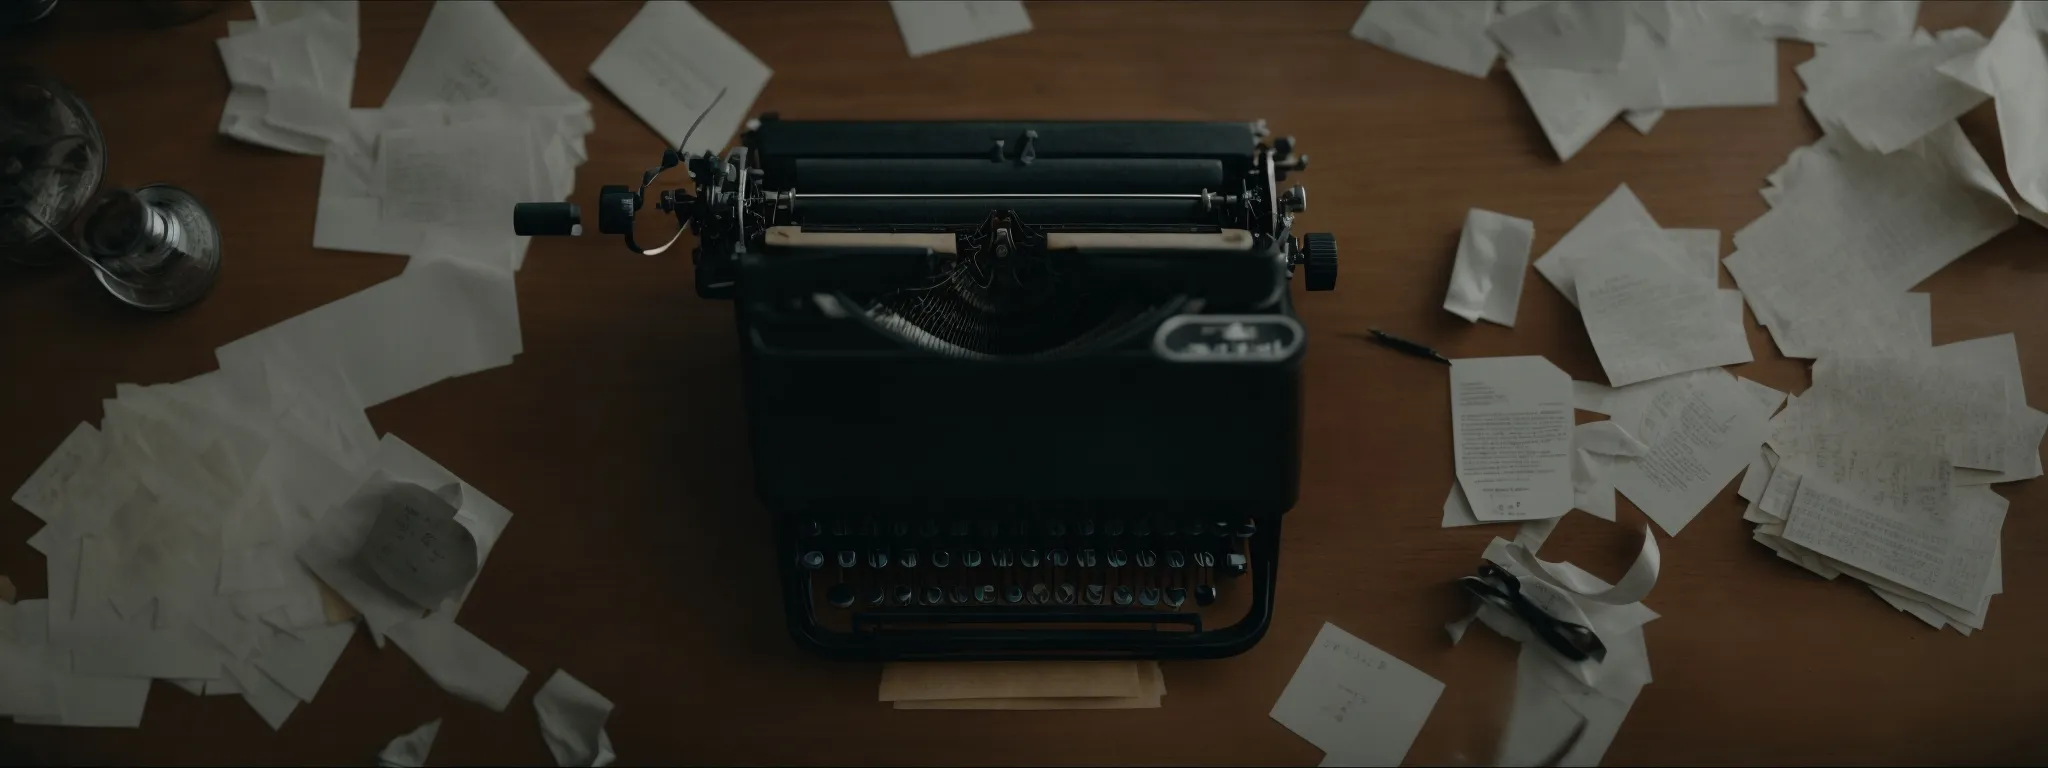 a focused individual types on a vintage typewriter, surrounded by crumpled paper drafts on a wooden desk.